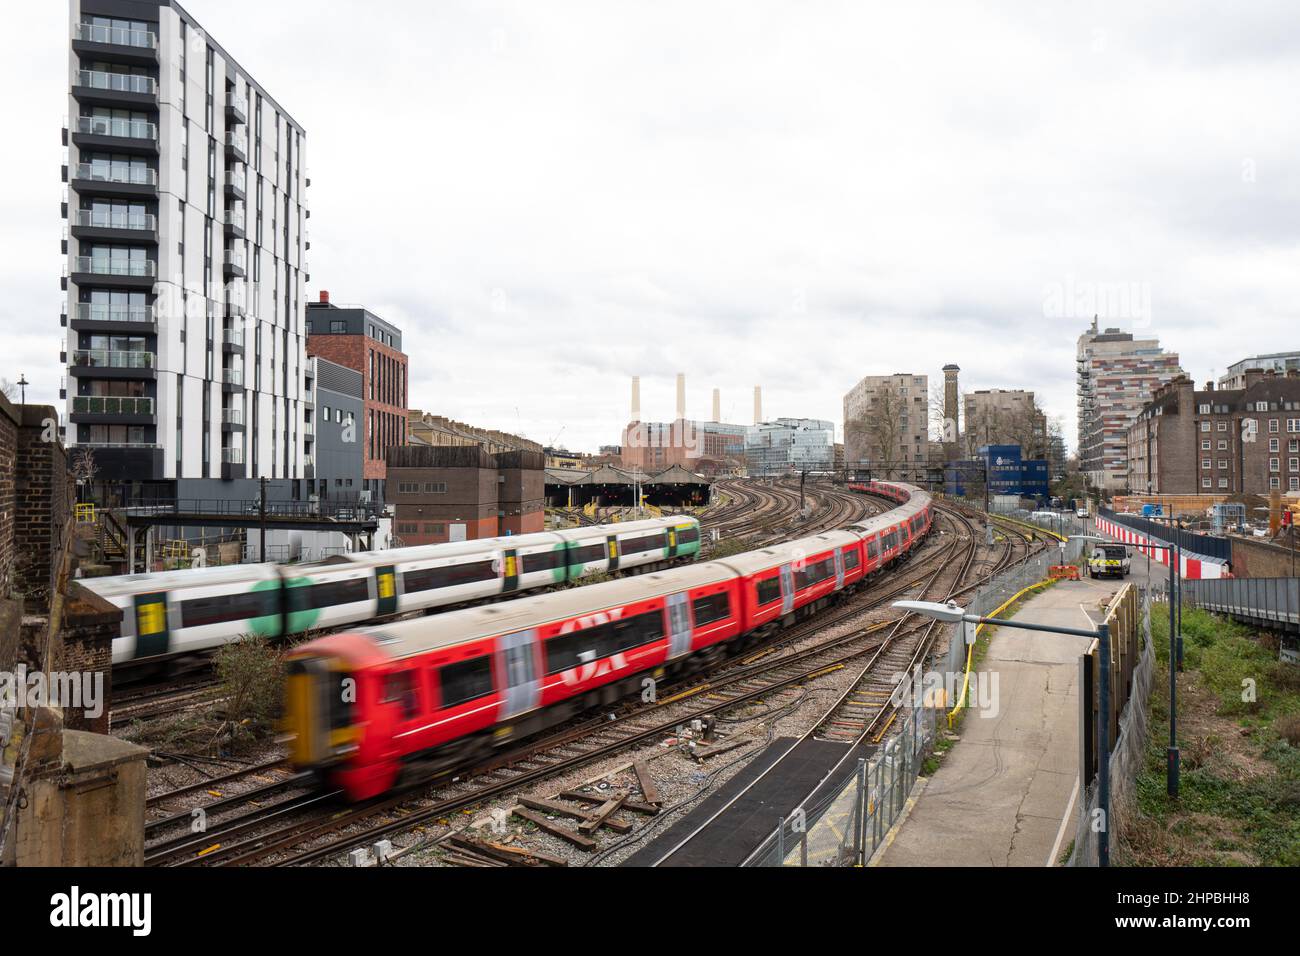 Mainline trains pass each other whilst in the background the iconic Battersea Power Station can be seen. London UK Stock Photo